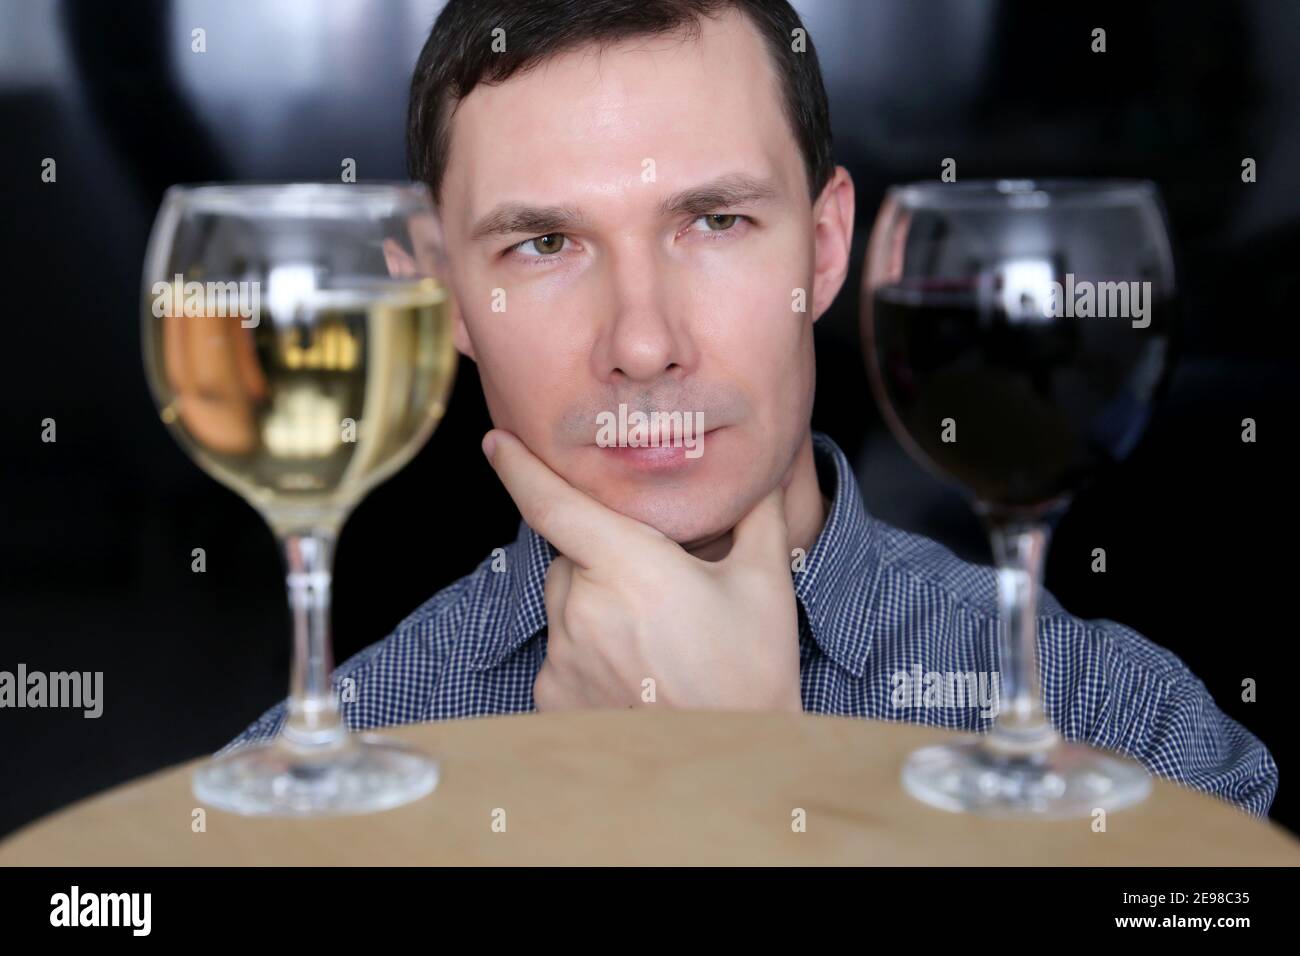 Choosing alcohol, man looks at the glasses with white and red wine. Tasting and party concept Stock Photo